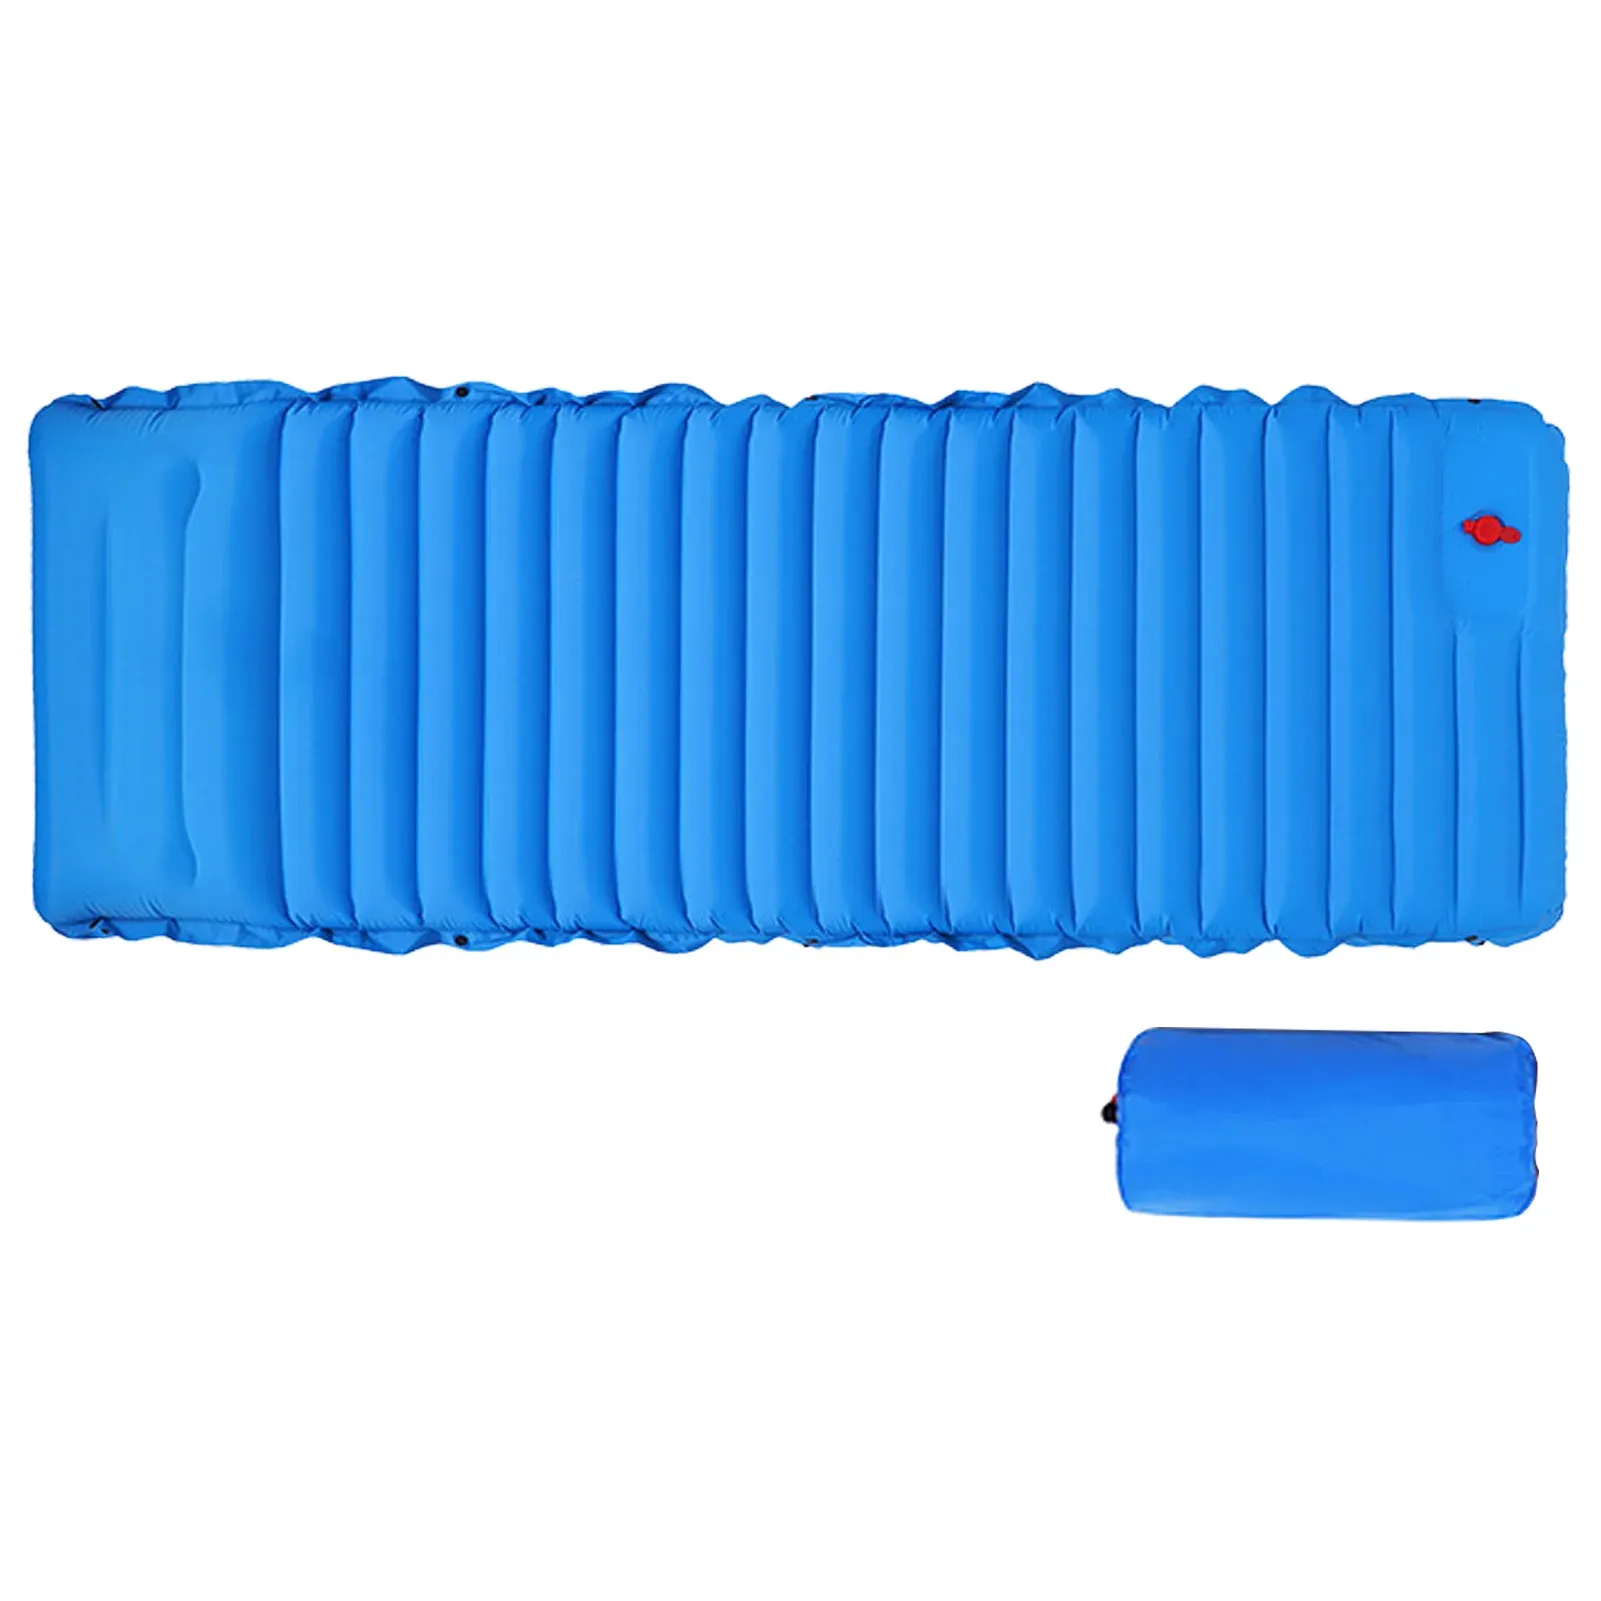 Tampons camping dormant pad selfiting matelas somnifère pour camping